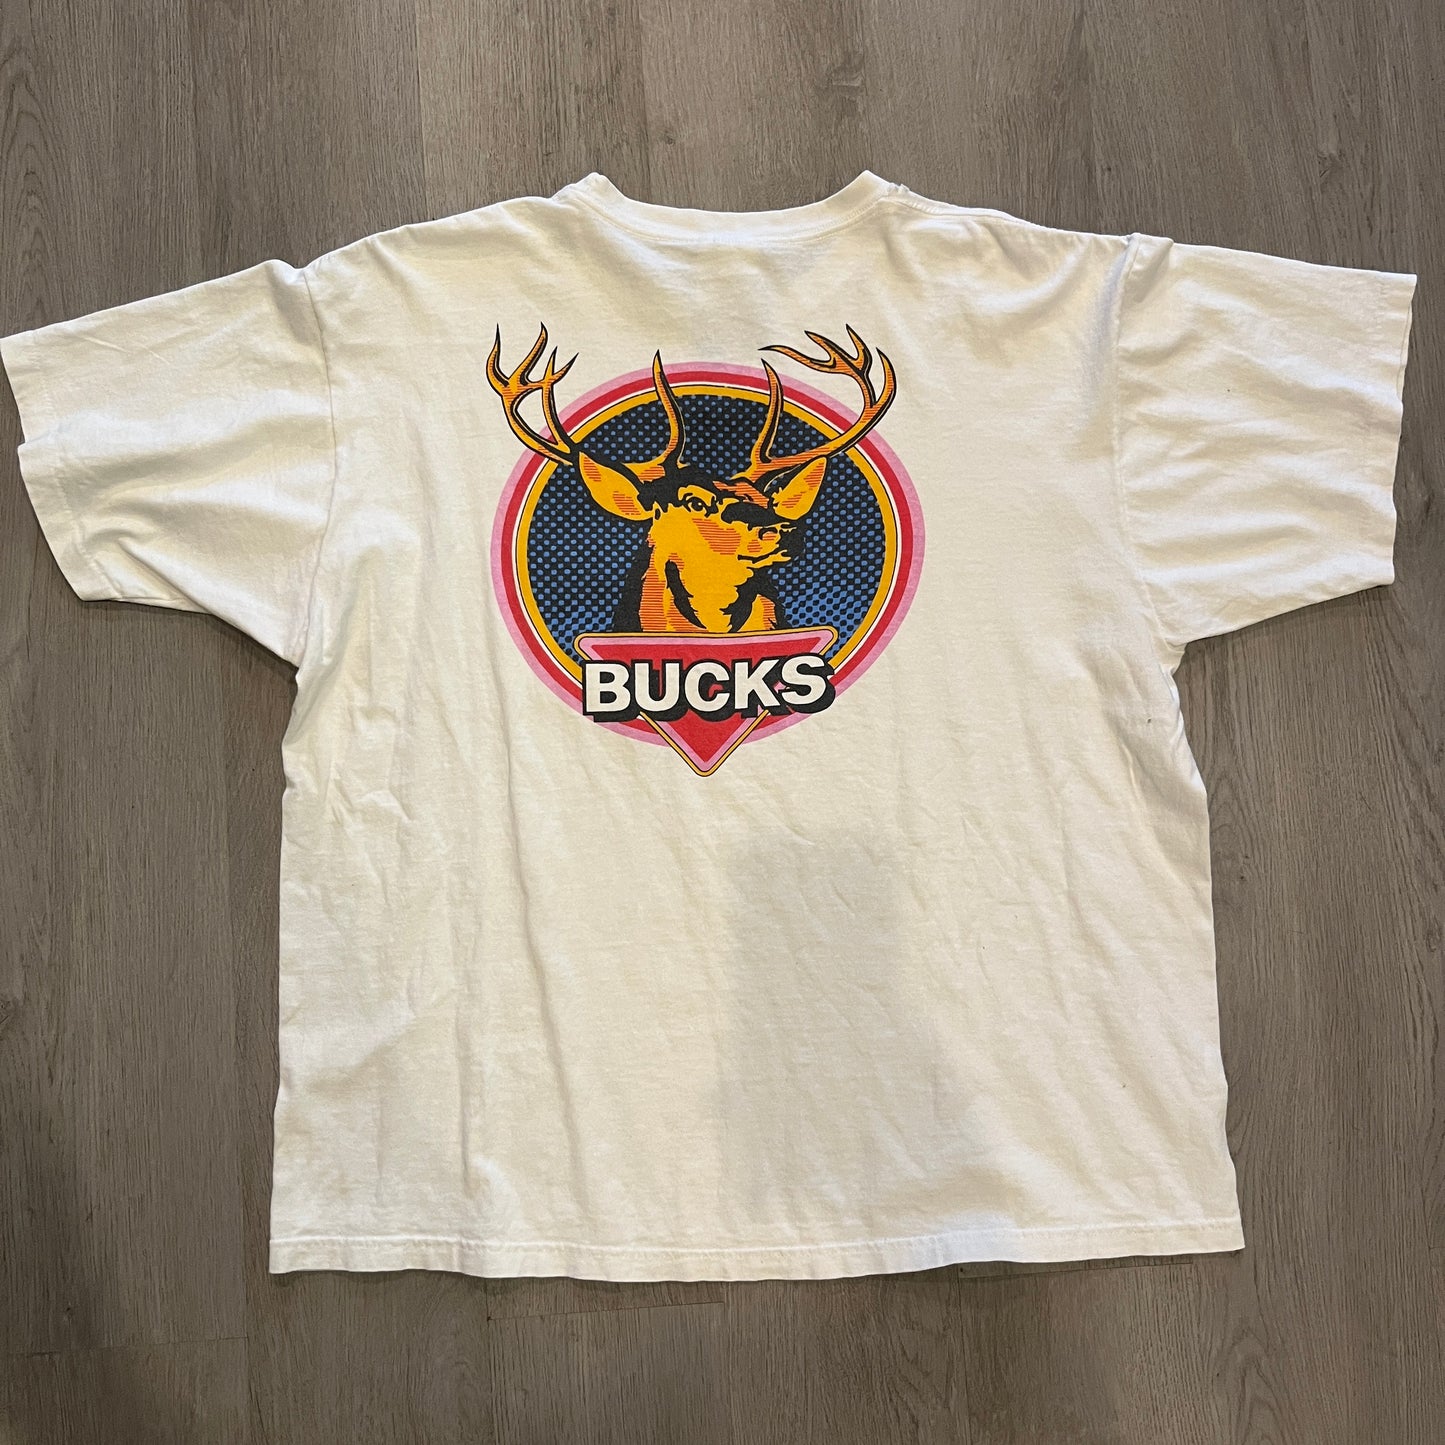 Vintage Buck The System Tee